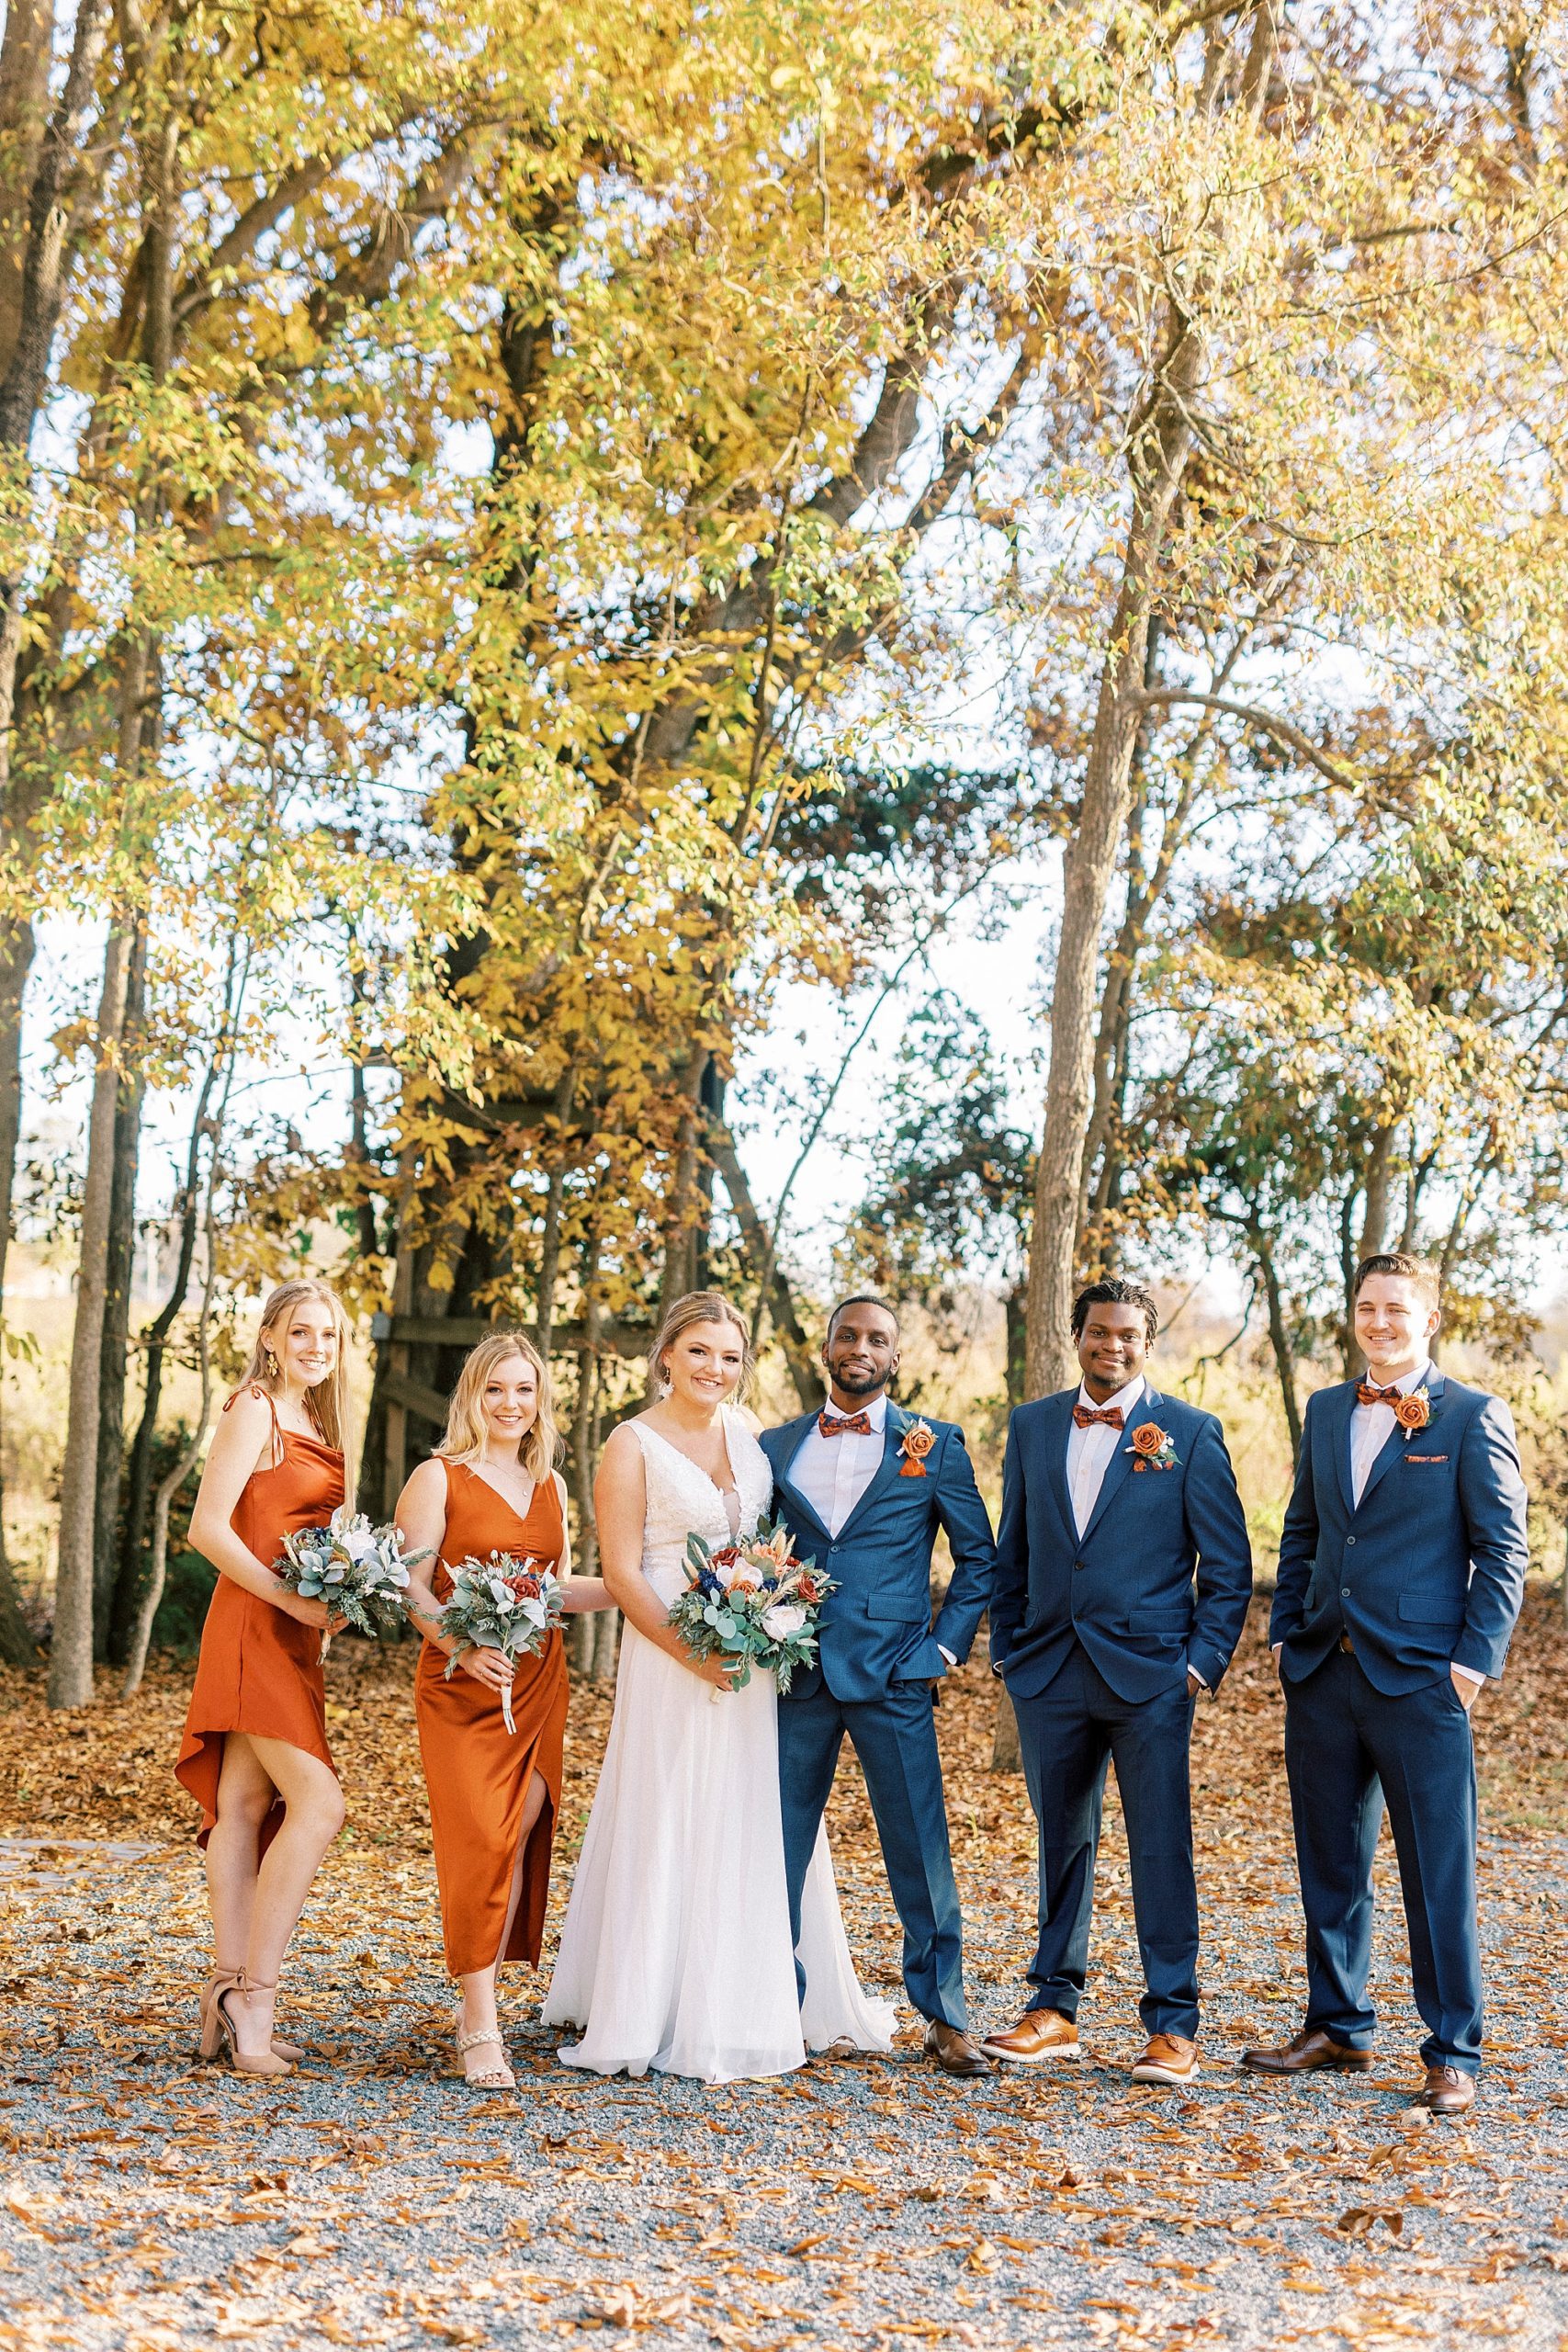 newlyweds stand together with bridesmaids in burnt orange and groomsmen in navy suits 